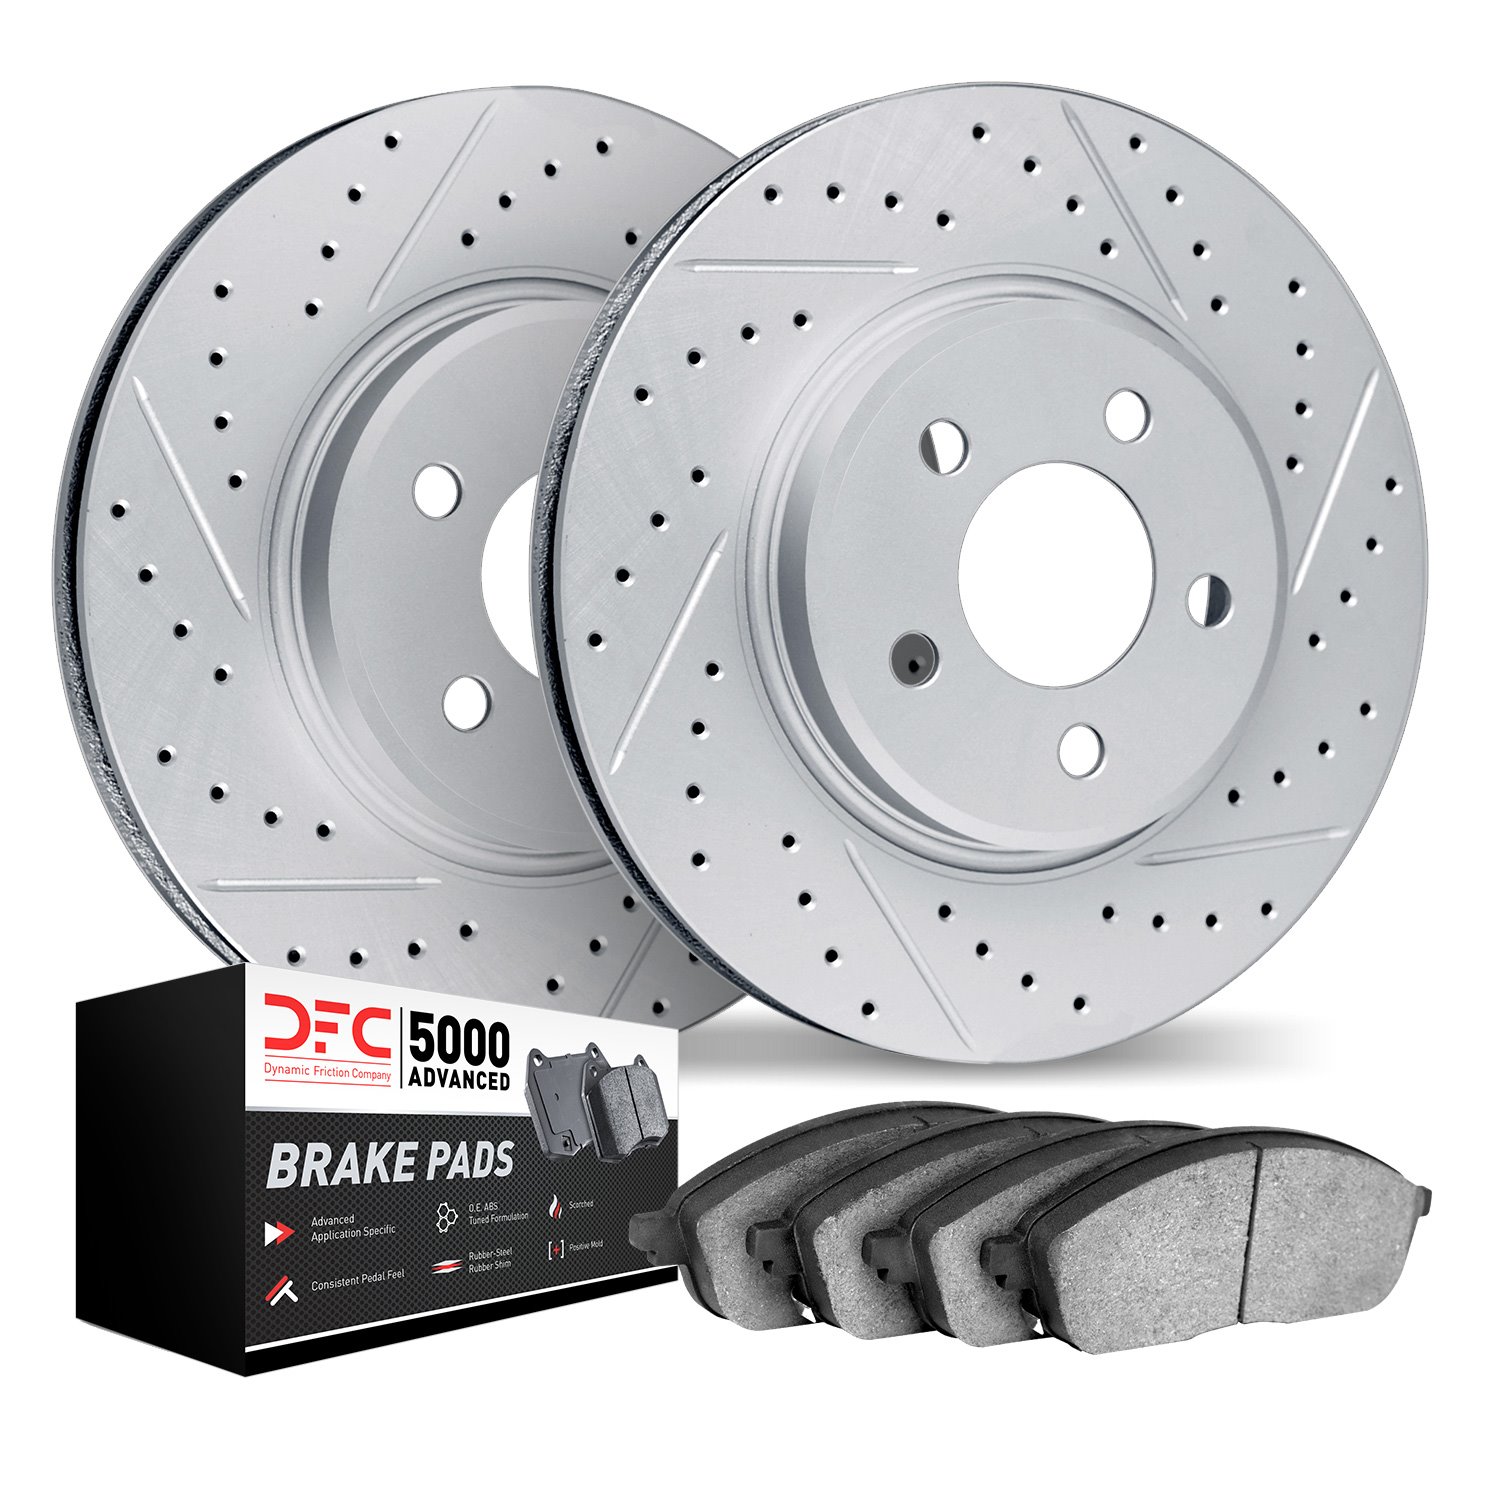 2502-11045 Geoperformance Drilled/Slotted Rotors w/5000 Advanced Brake Pads Kit, 2020-2020 Land Rover, Position: Front